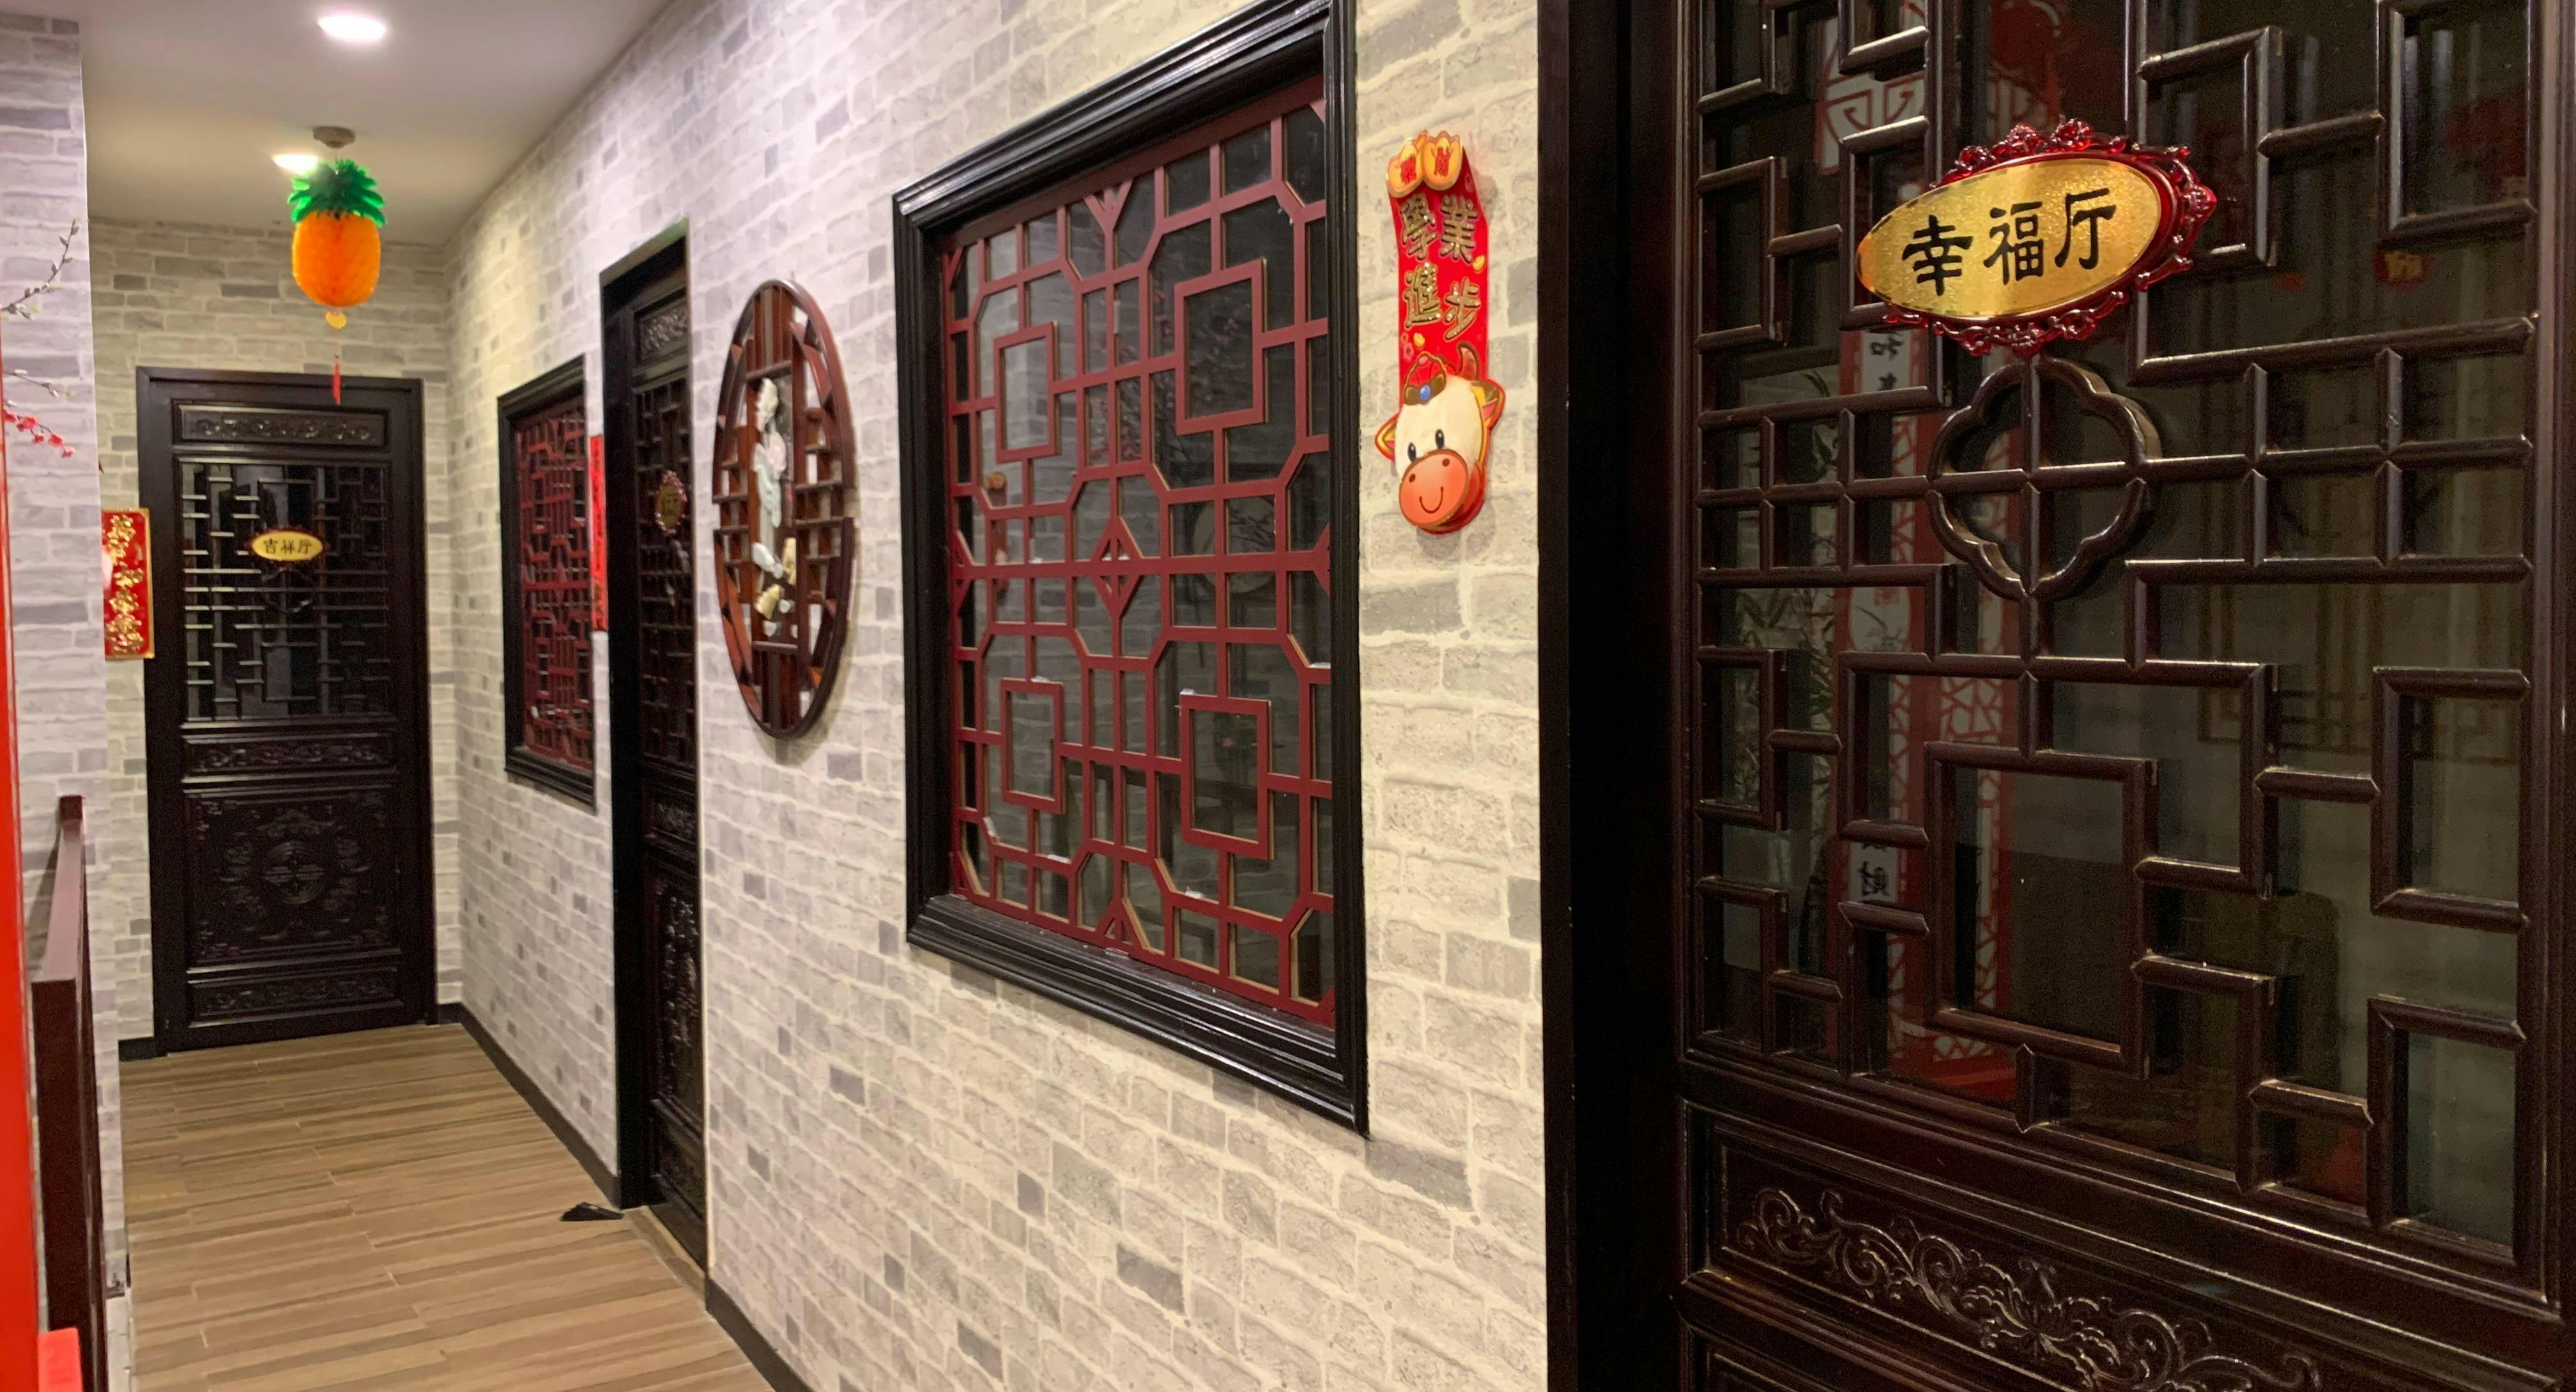 Photo of restaurant Guo Shang Piao Hotpot Winery 锅上飘火锅酒庄 in Farrer Park, Singapore